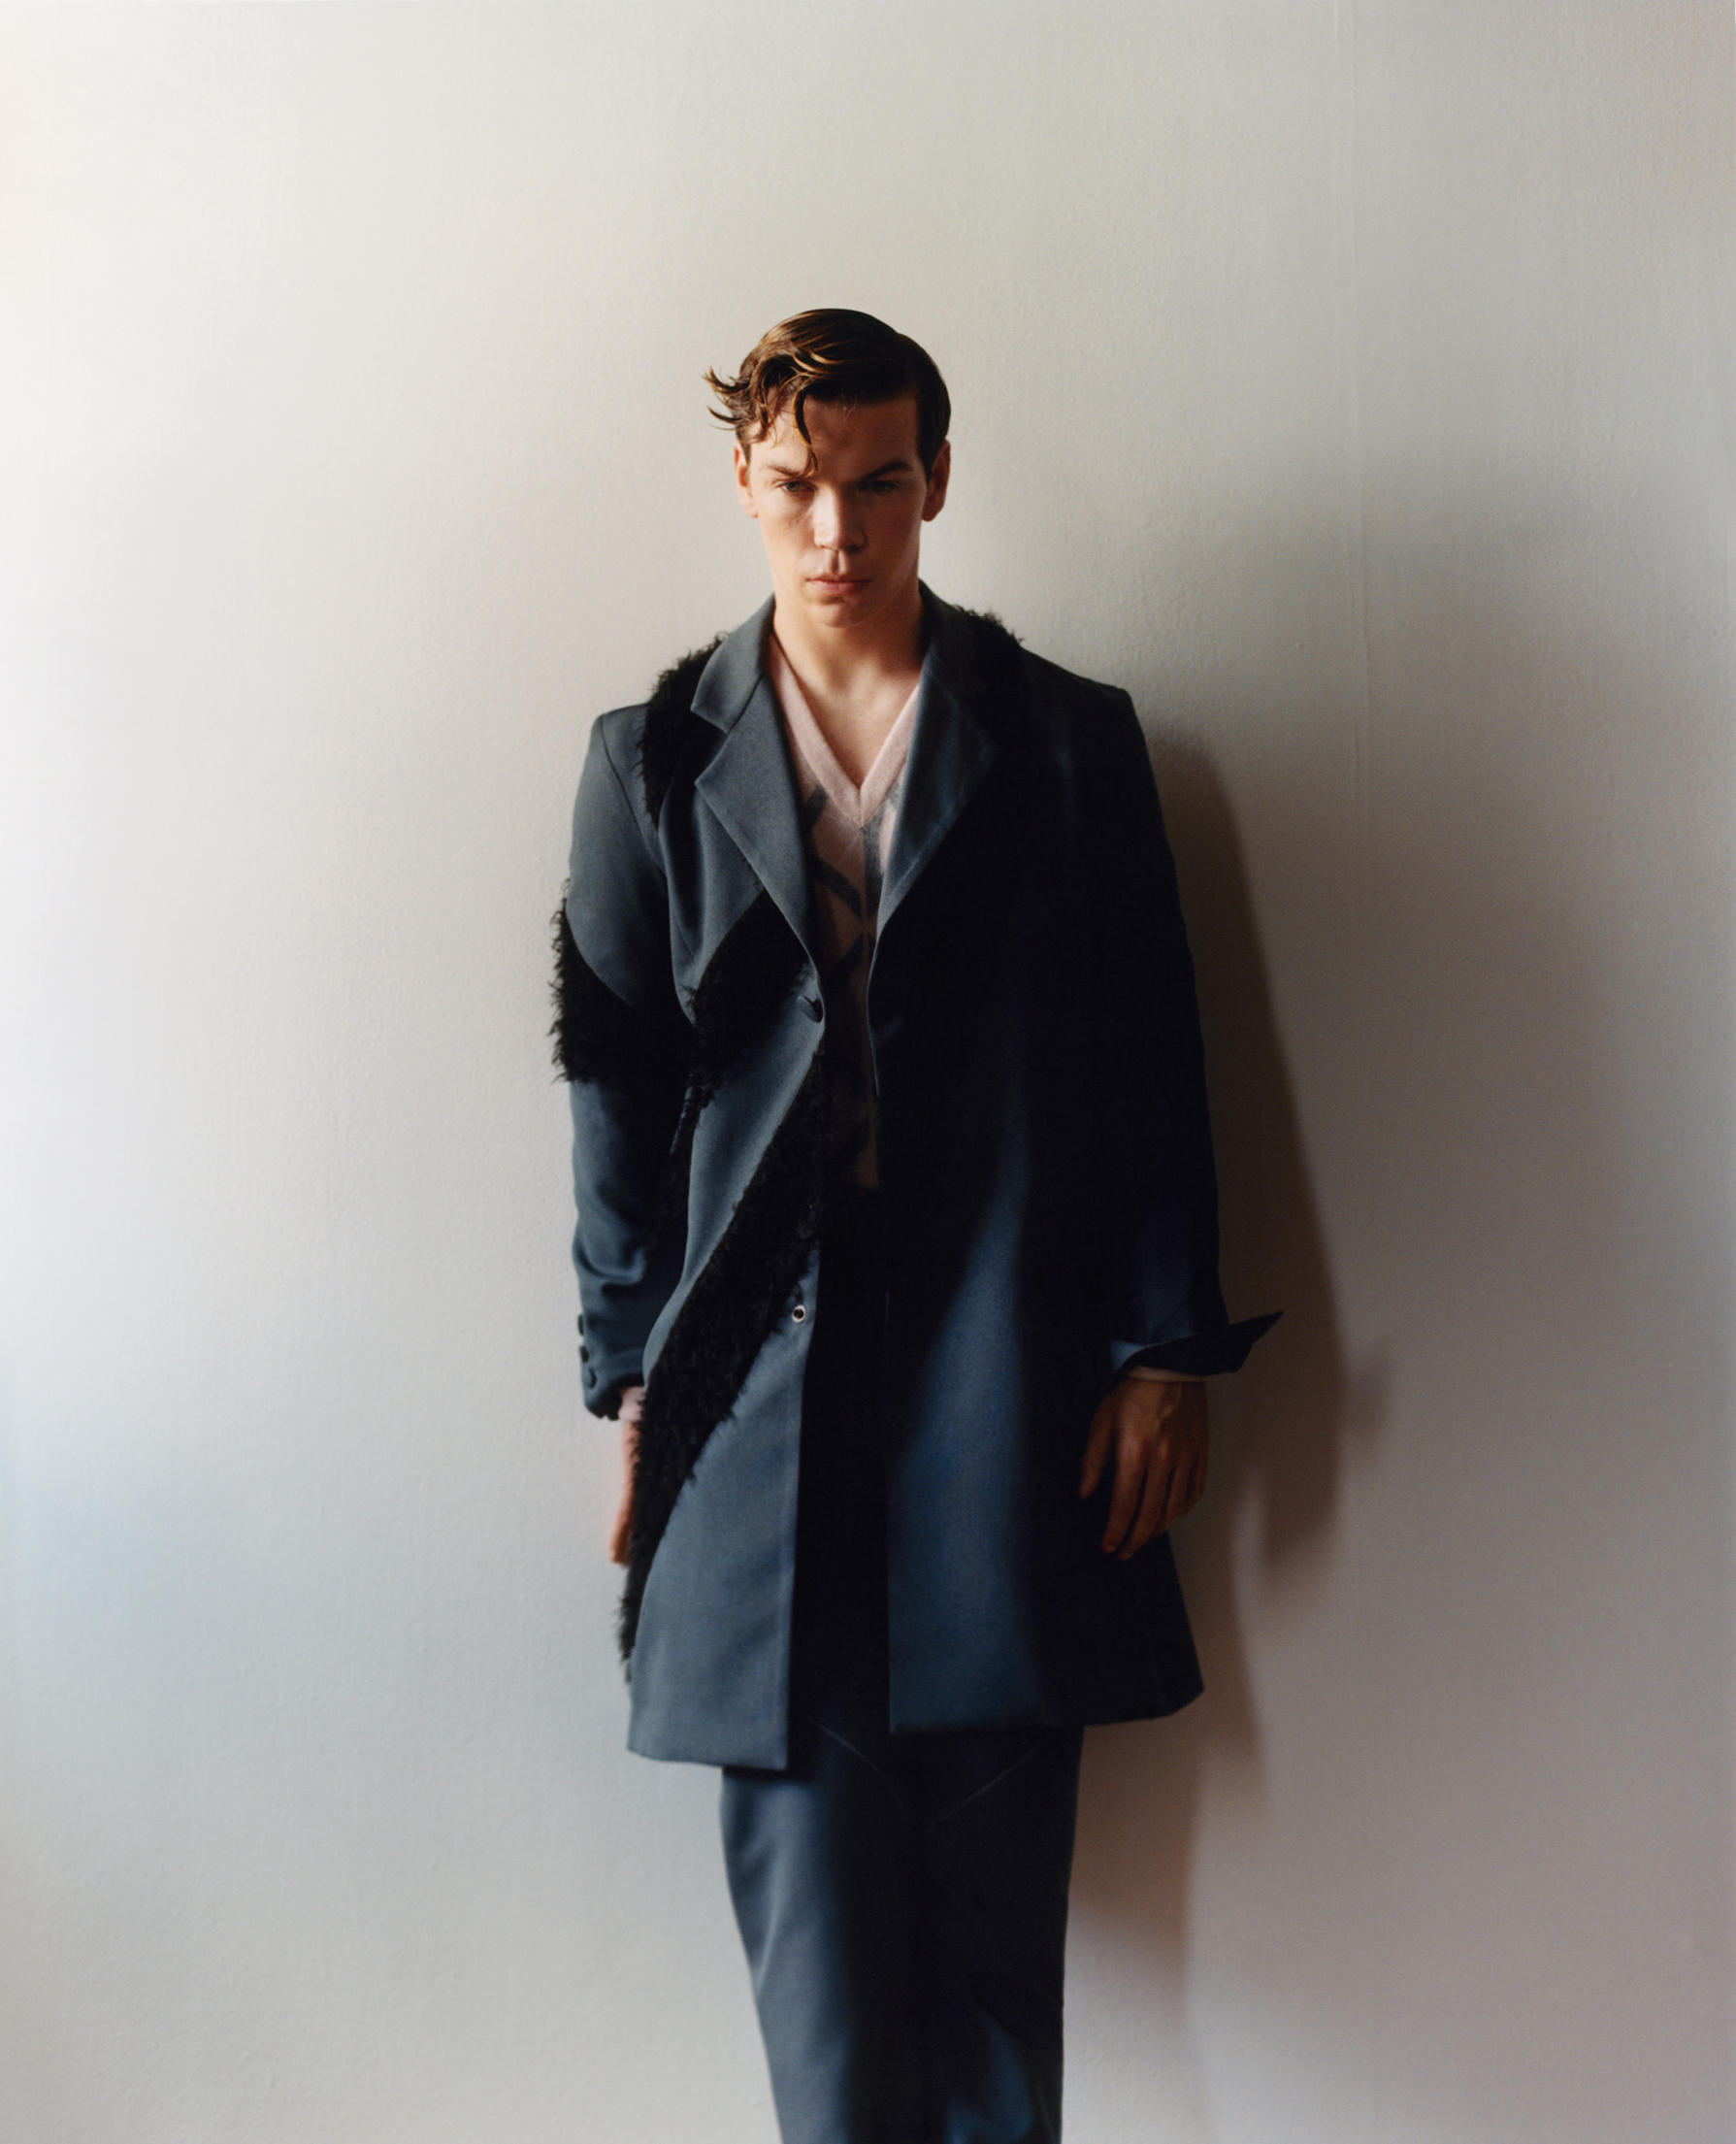 Coat and trousers by Kiko Kostadinov. Sweater by Dior Men.